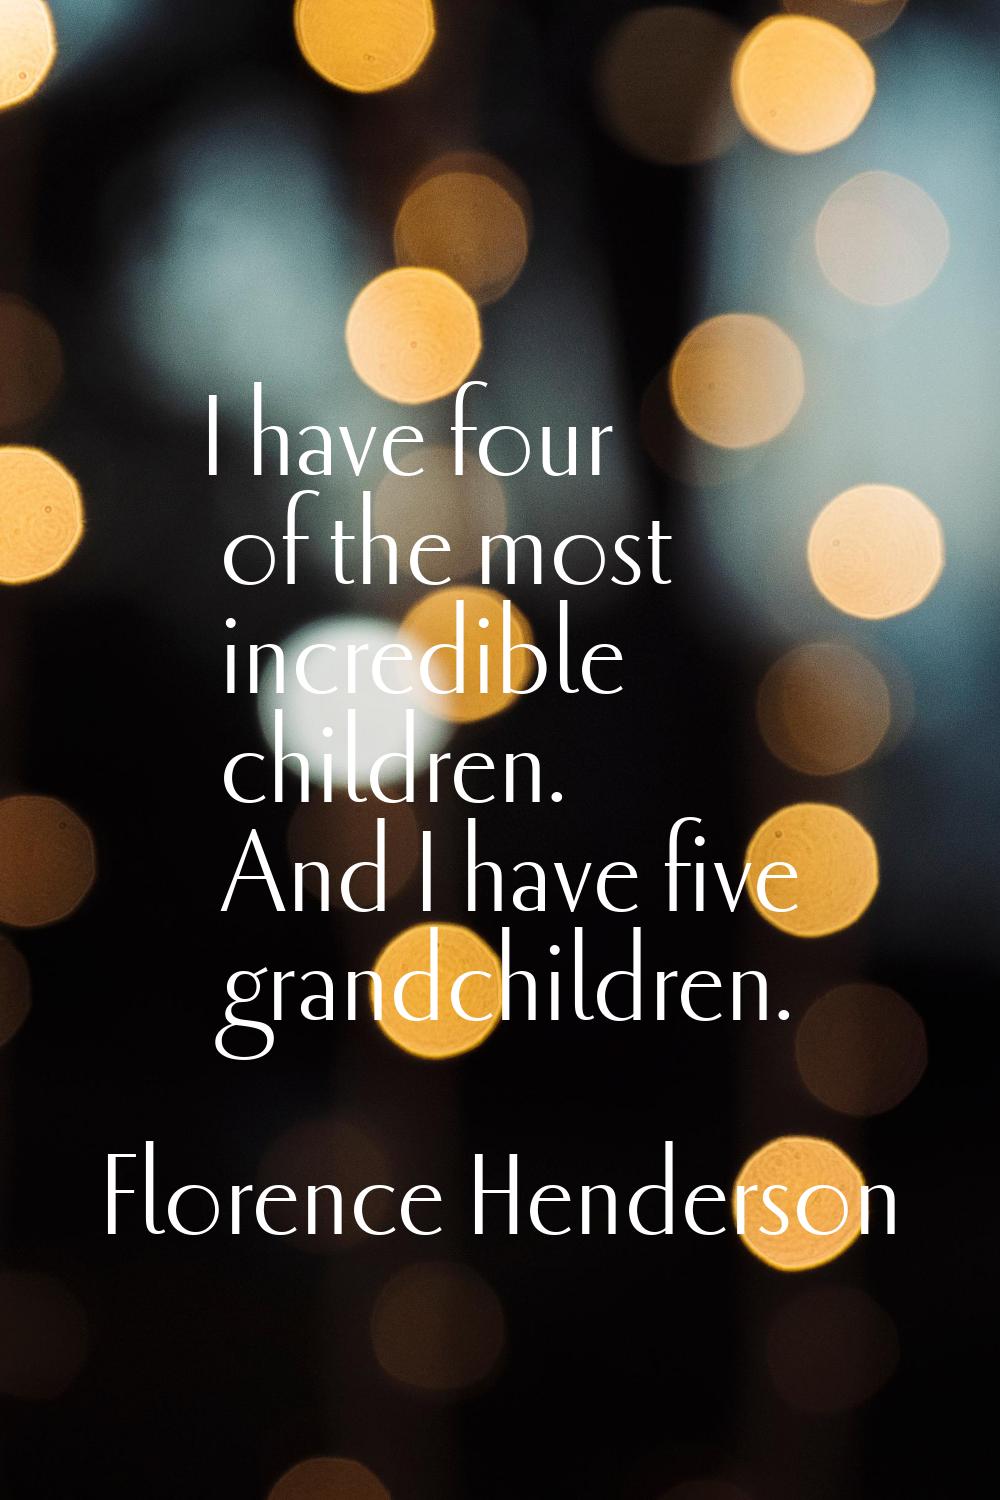 I have four of the most incredible children. And I have five grandchildren.